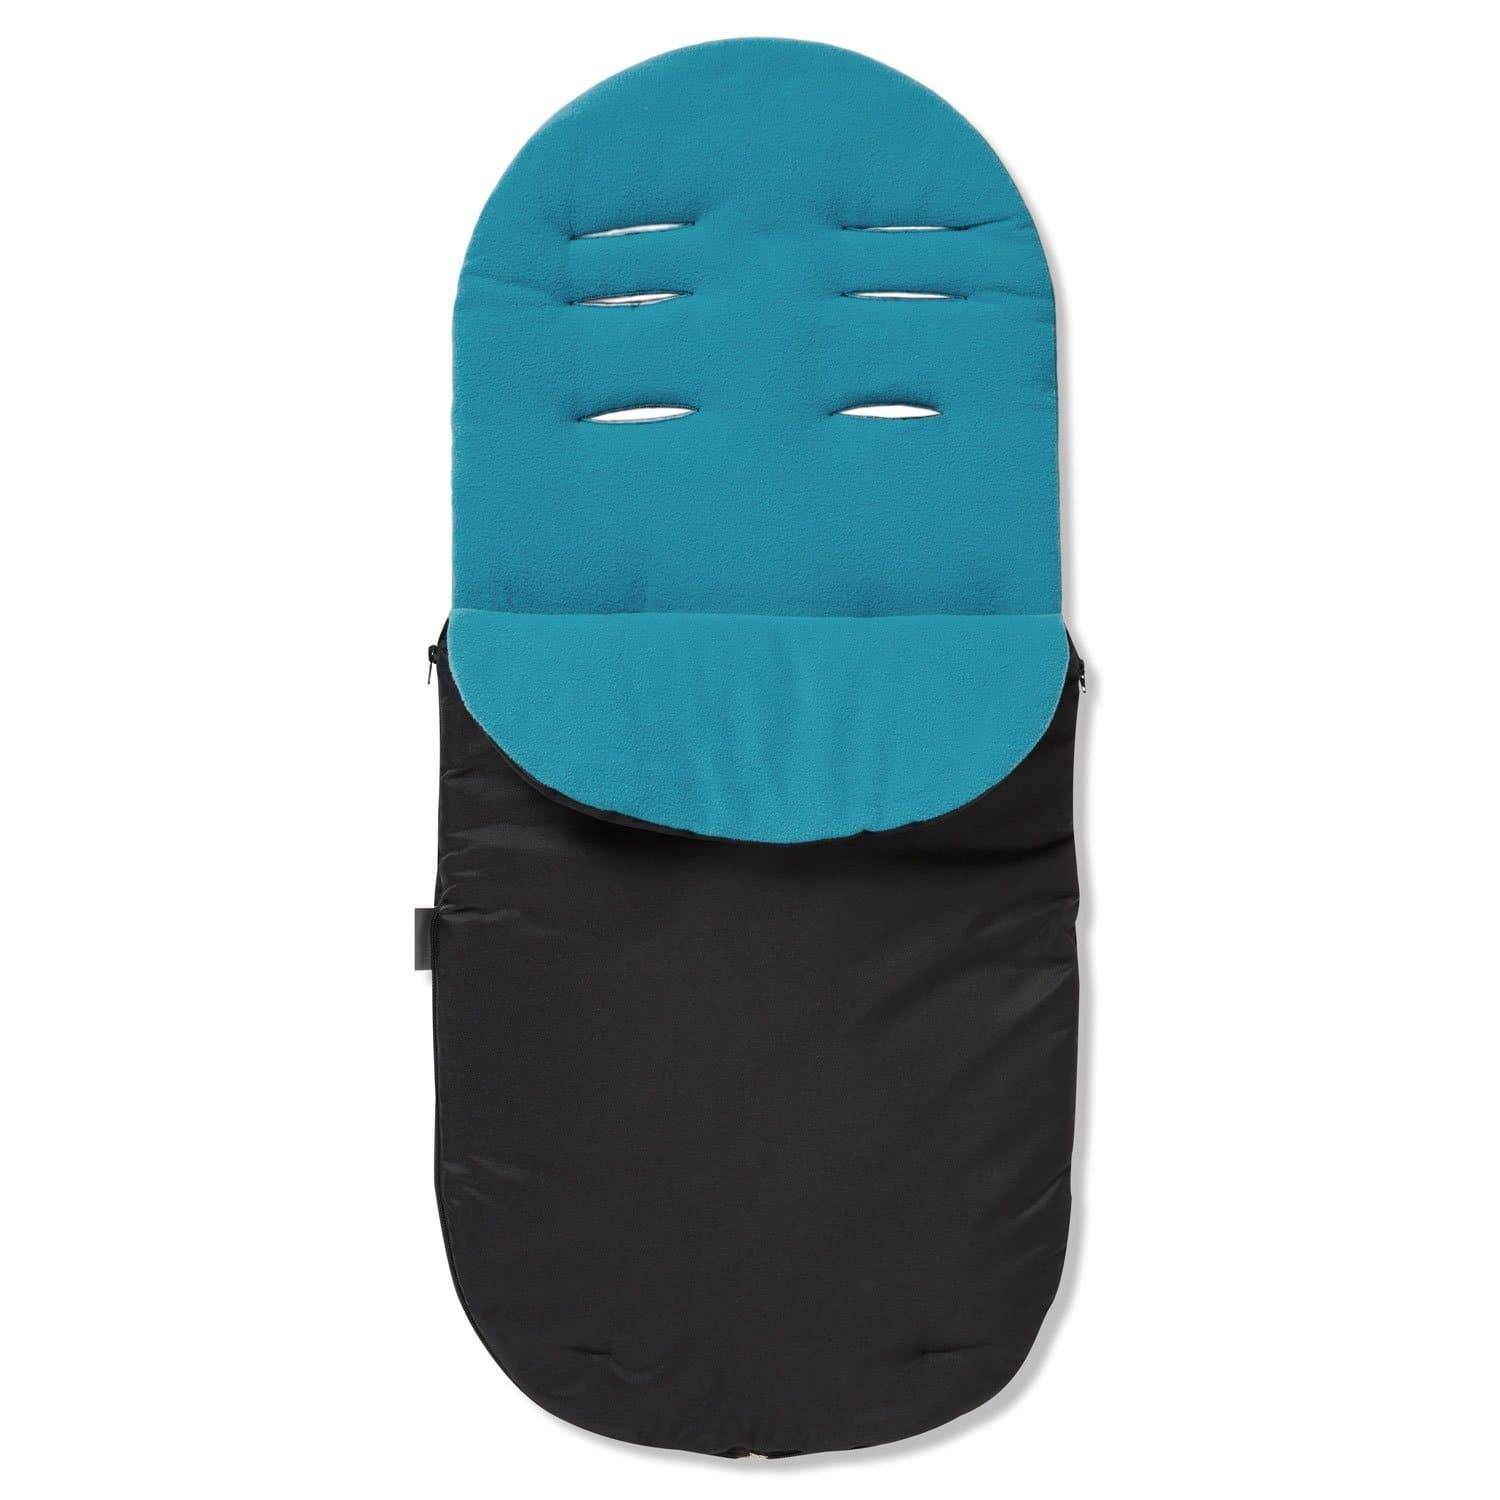 Footmuff / Cosy Toes Compatible with Zooper - Turquoise / Fits All Models | For Your Little One